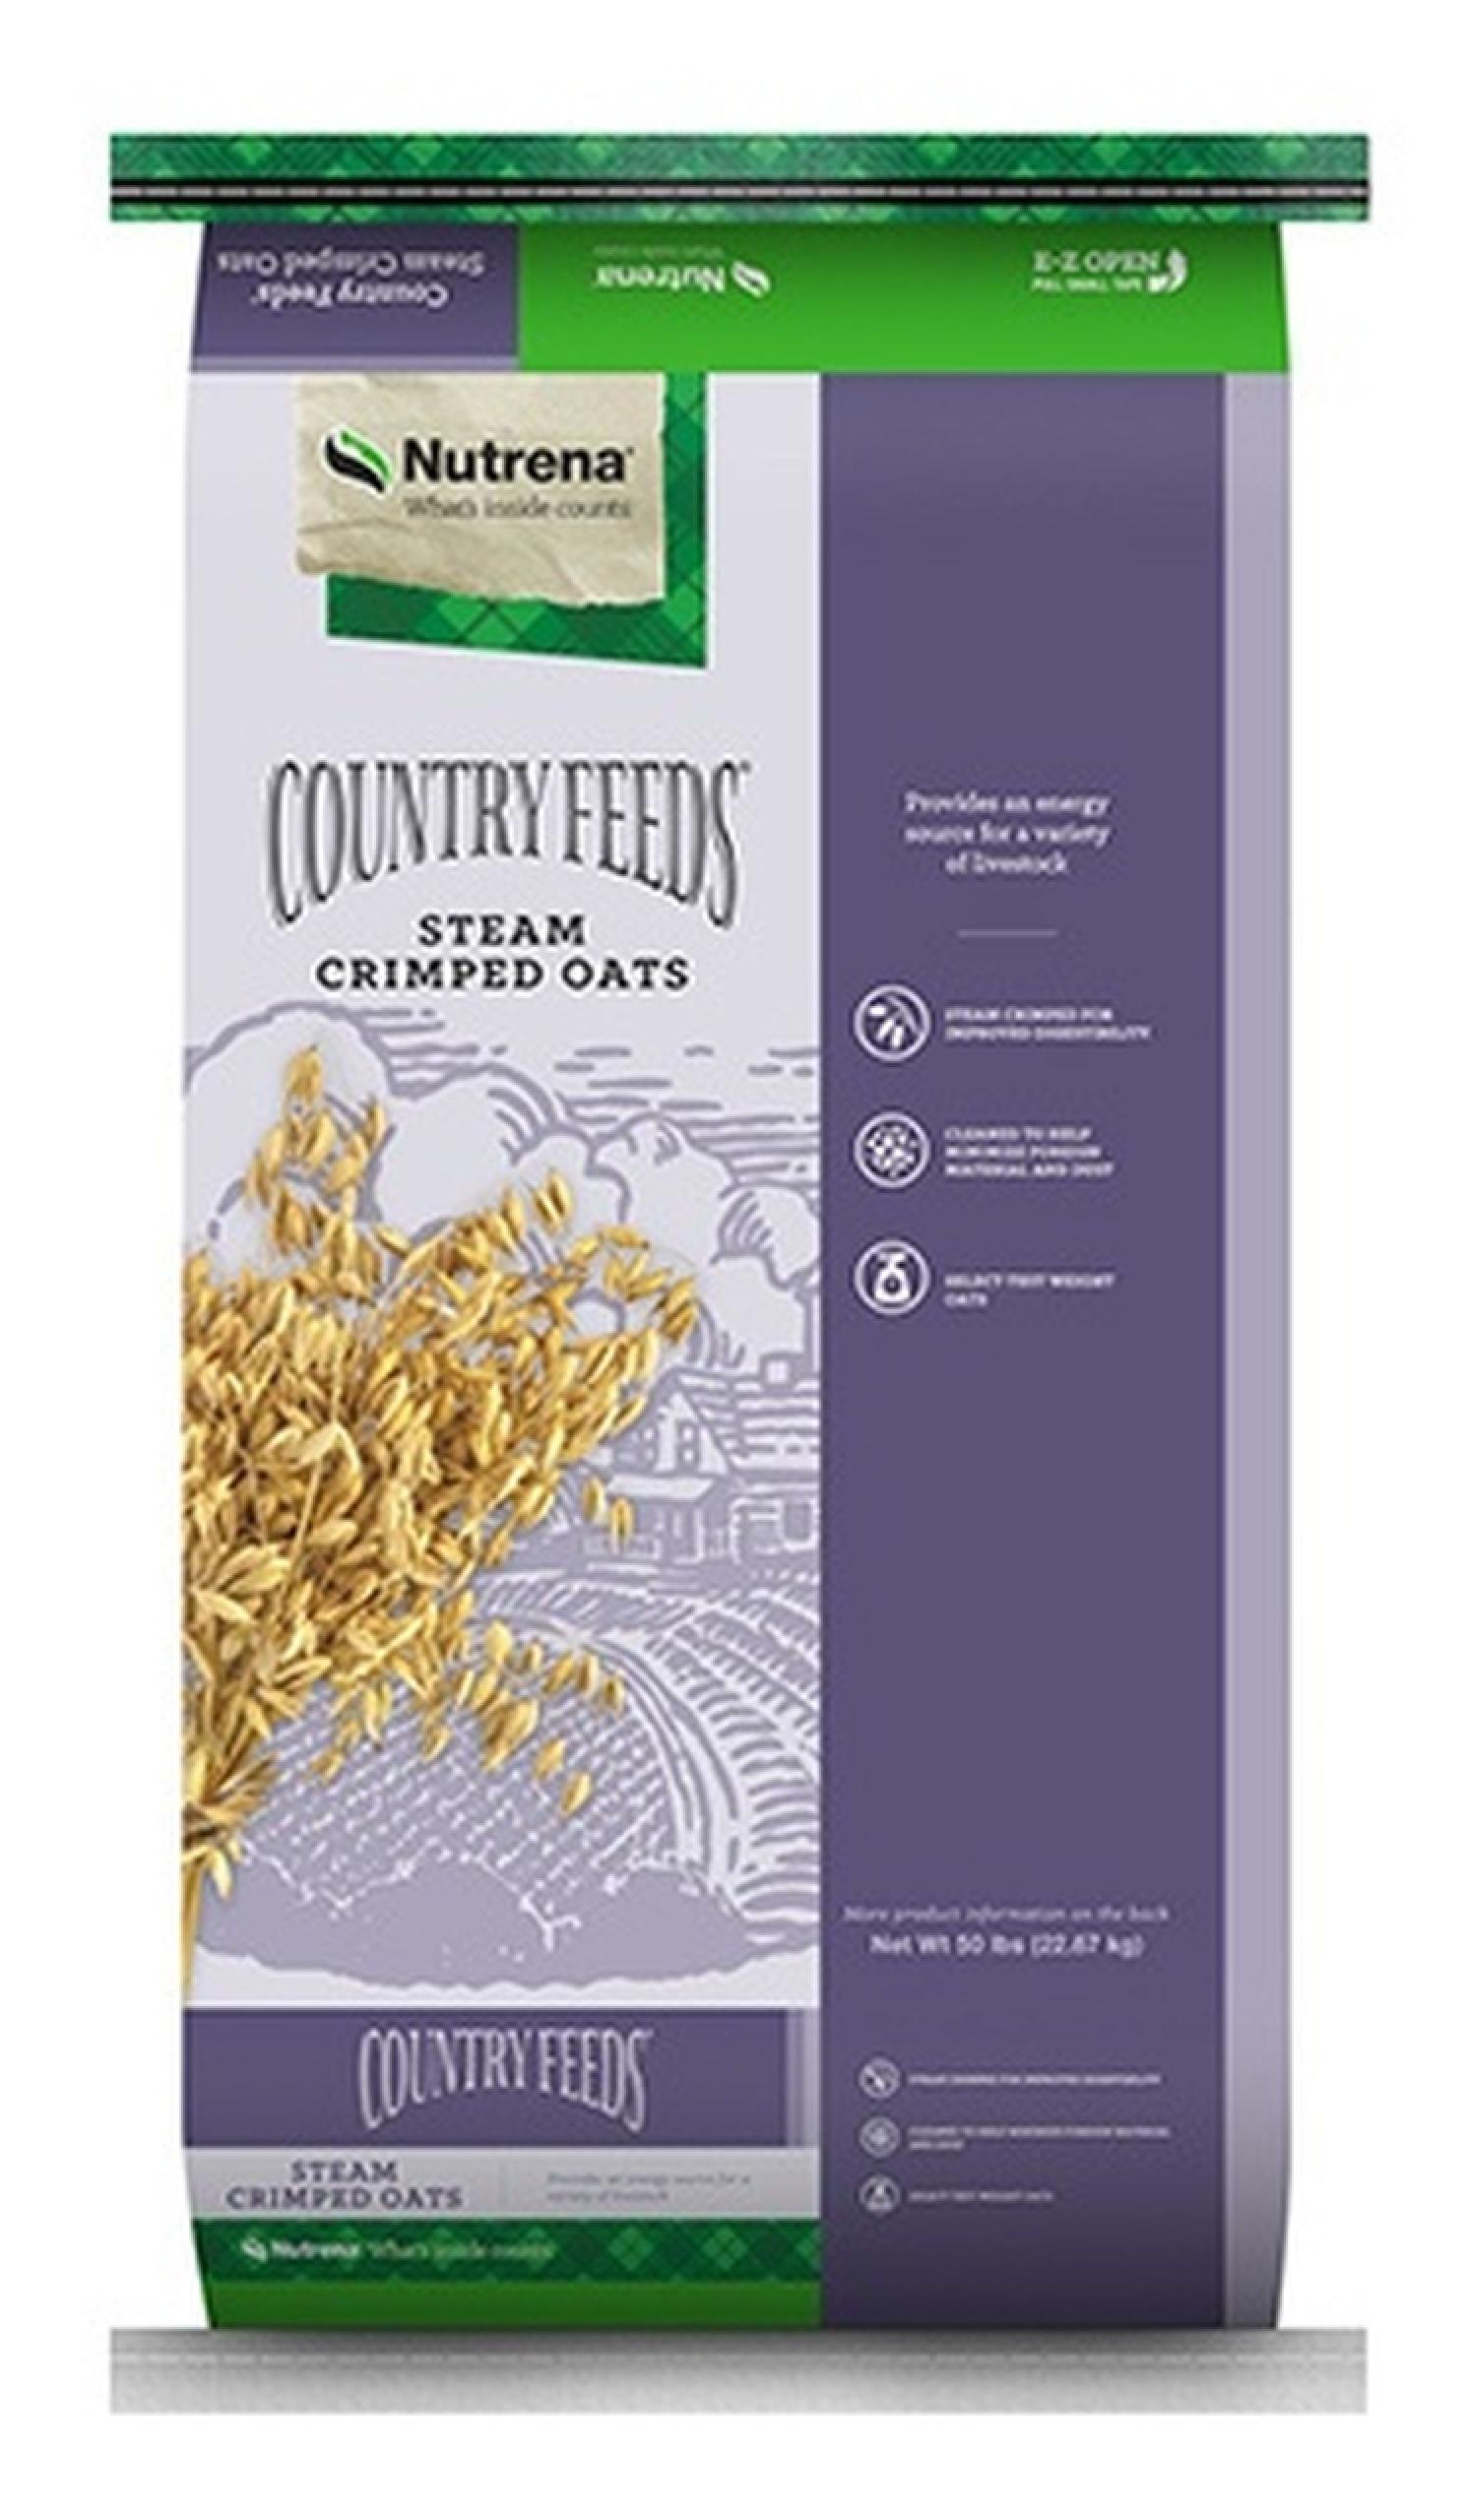 Nutrena Country Feeds Steam Crimped Oats